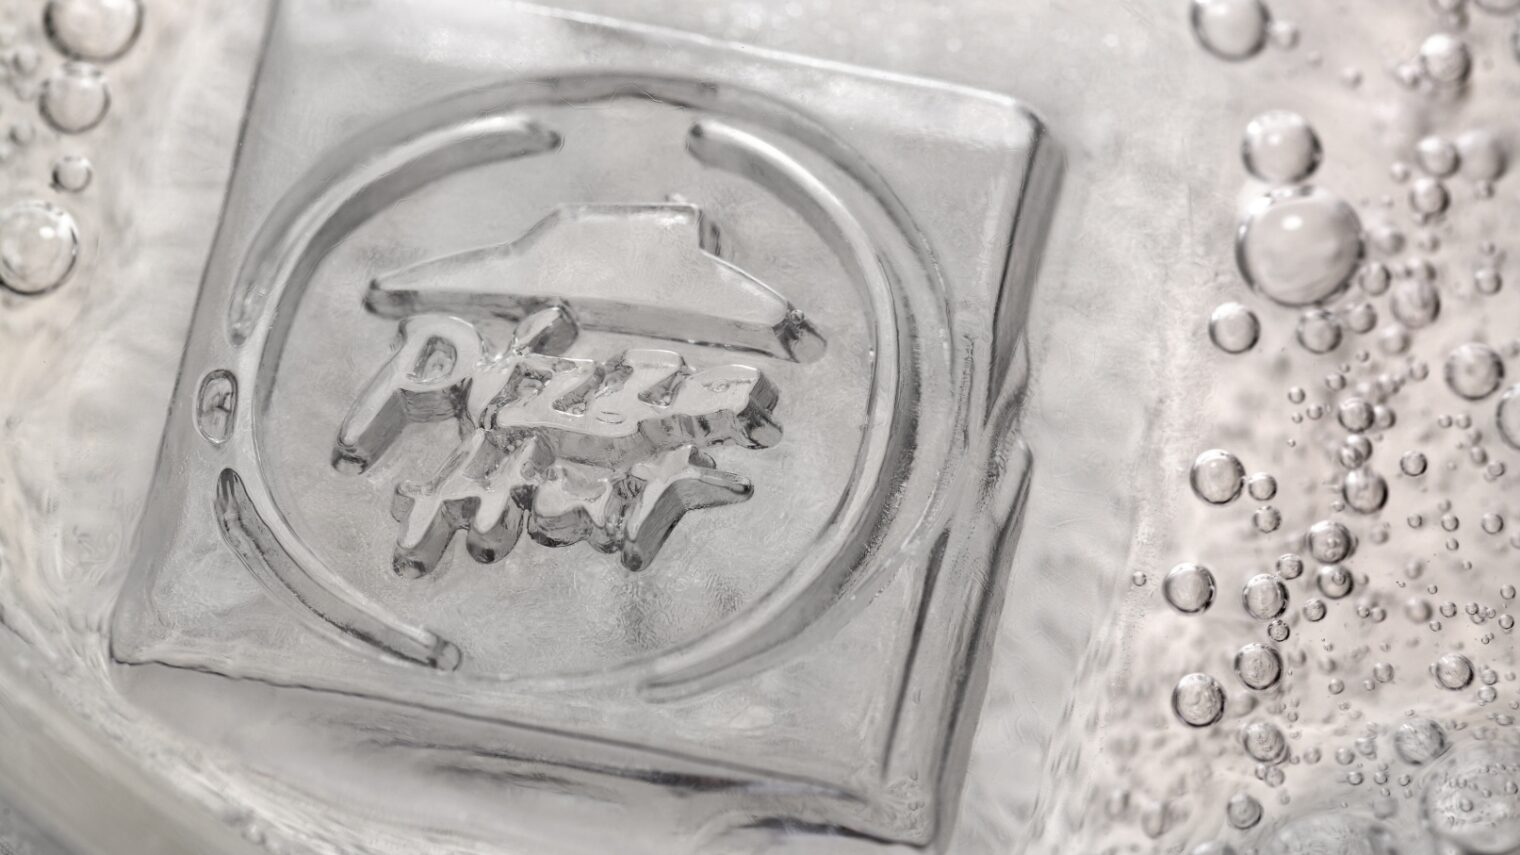 If Israel’s Icebow is successful, chains including Pizza Hut could imprint ice with logos. This unaltered photo is for demonstration purposes, was taken by Benny Gamzo for Icebow.